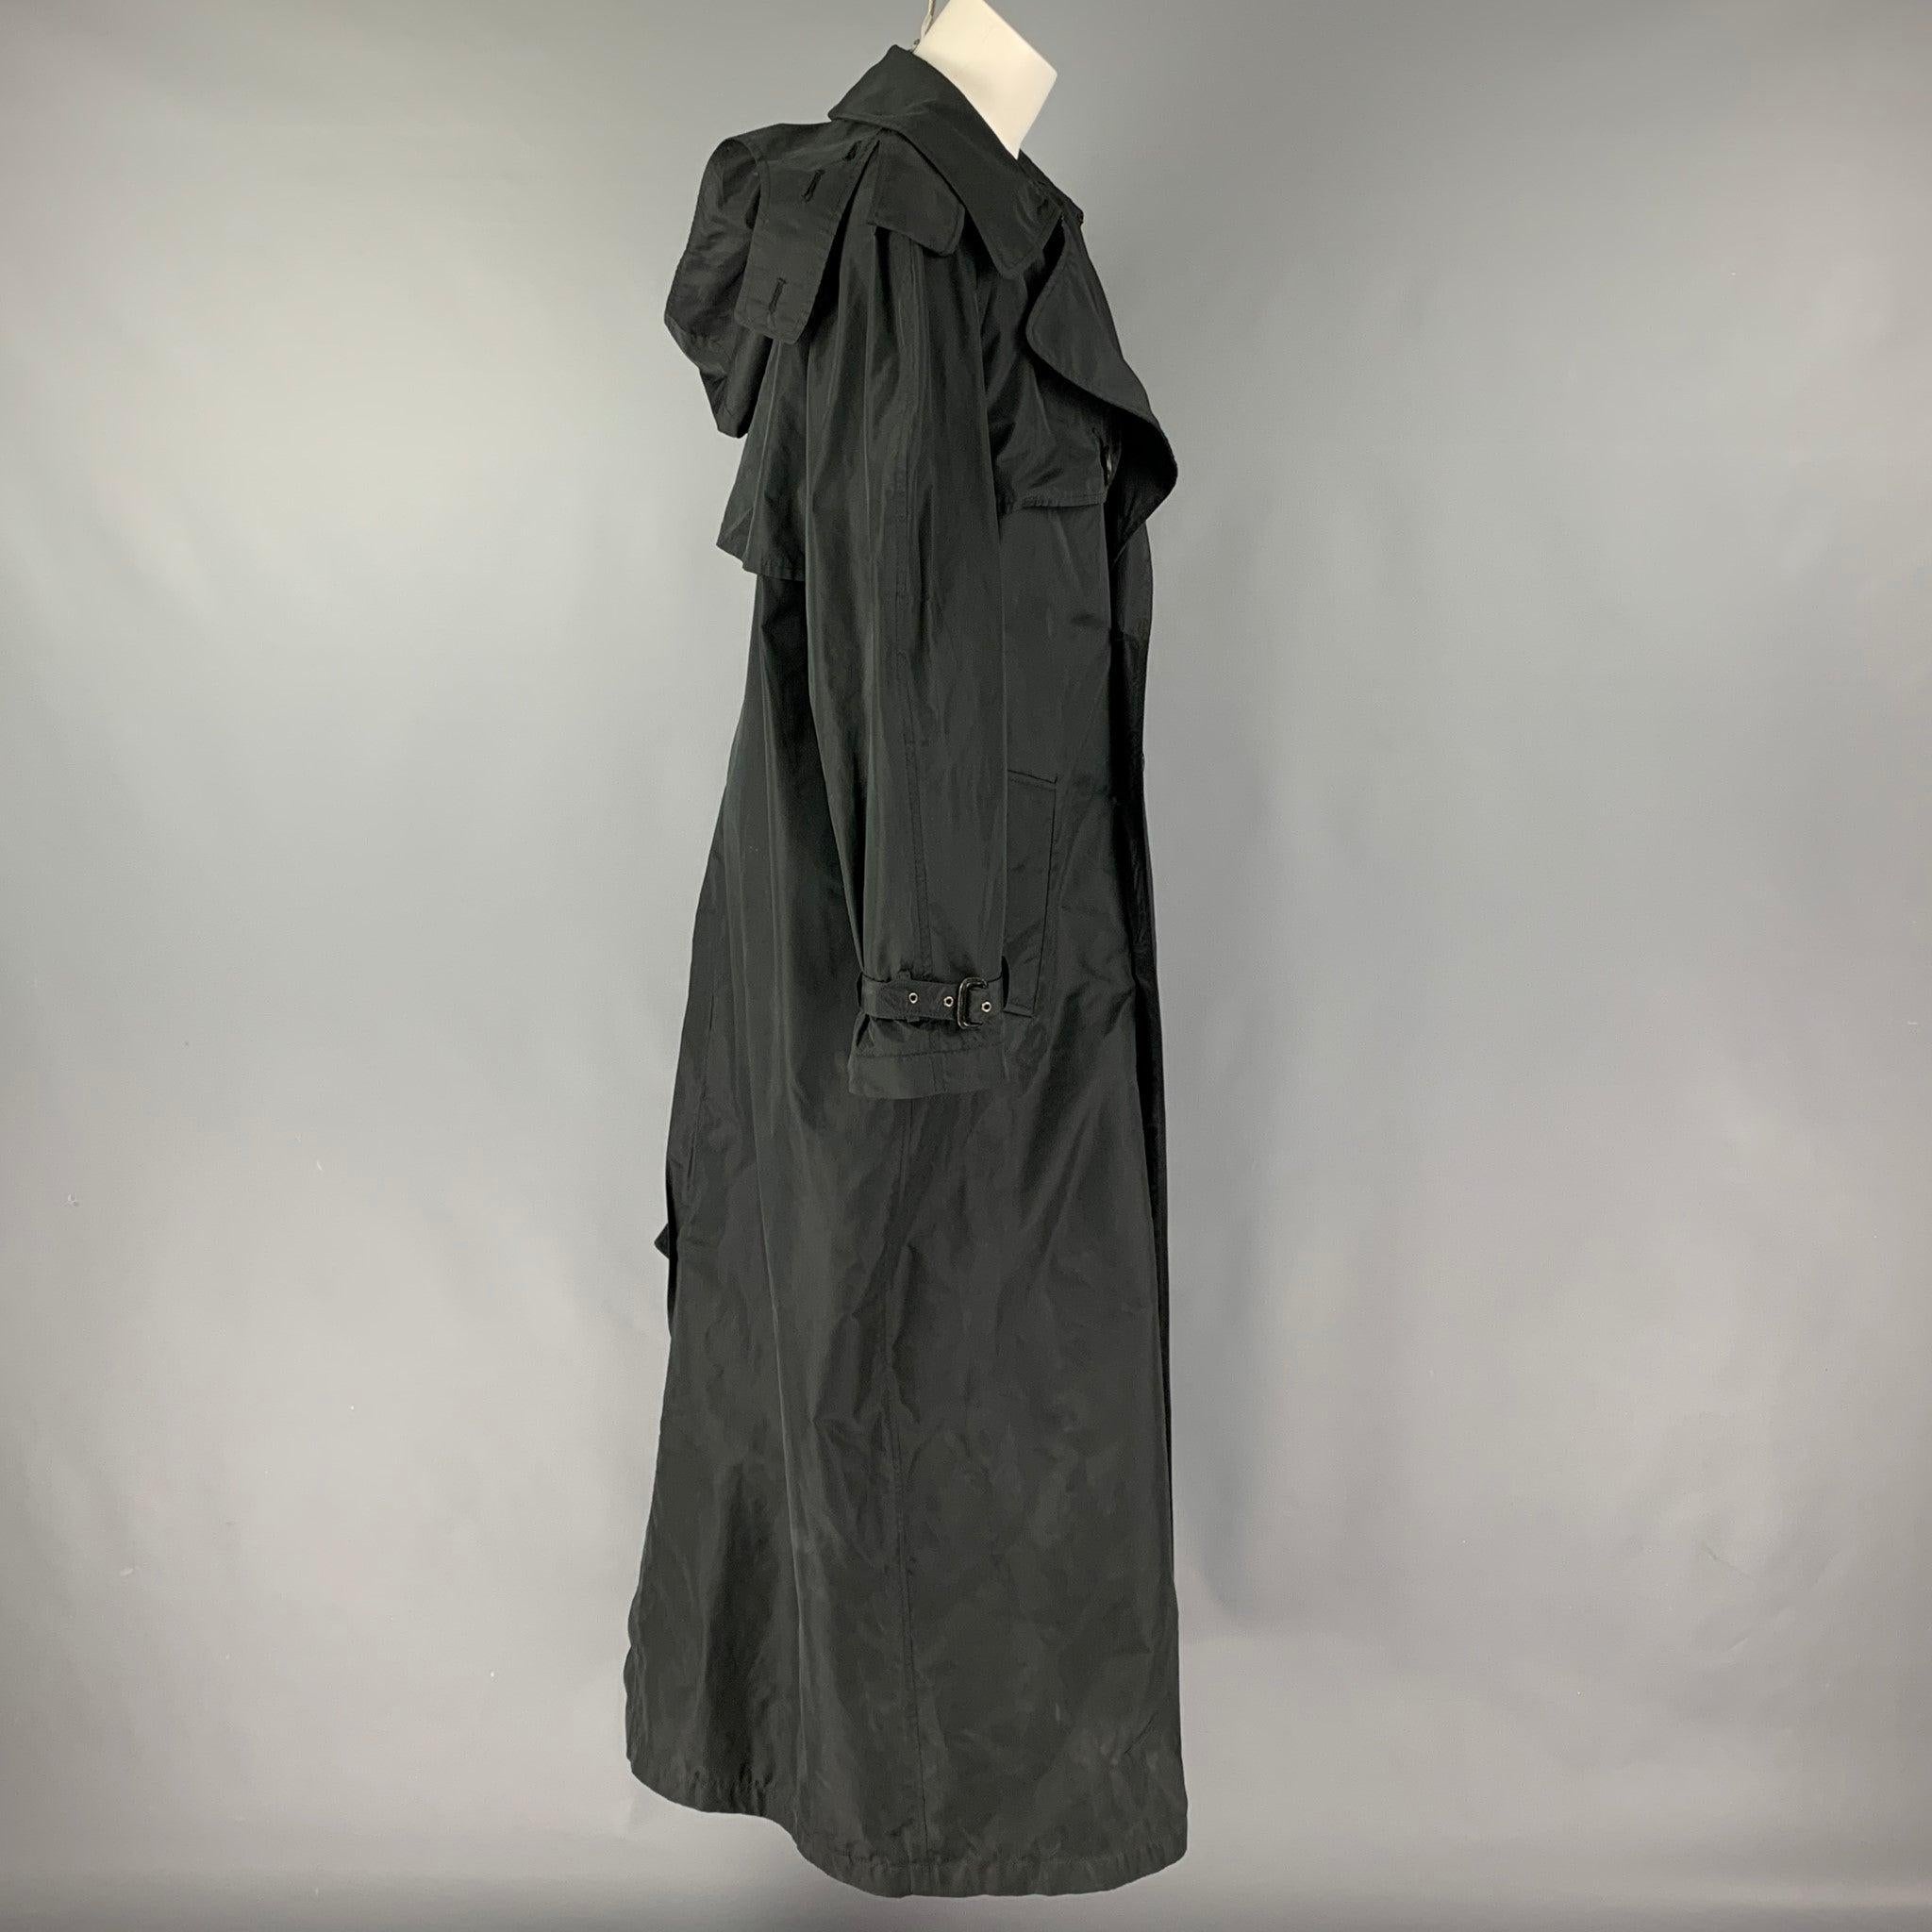 JEAN PAUL GAULTIER coat comes in a black polyester / silk featuring a large lapel, slit pockets, belted sleeve details, hooded, and a double breasted closure. Missing Belt. Made in Italy.
Very Good
Pre-Owned Condition. 

Marked:  I 42 / D 38 / F 38